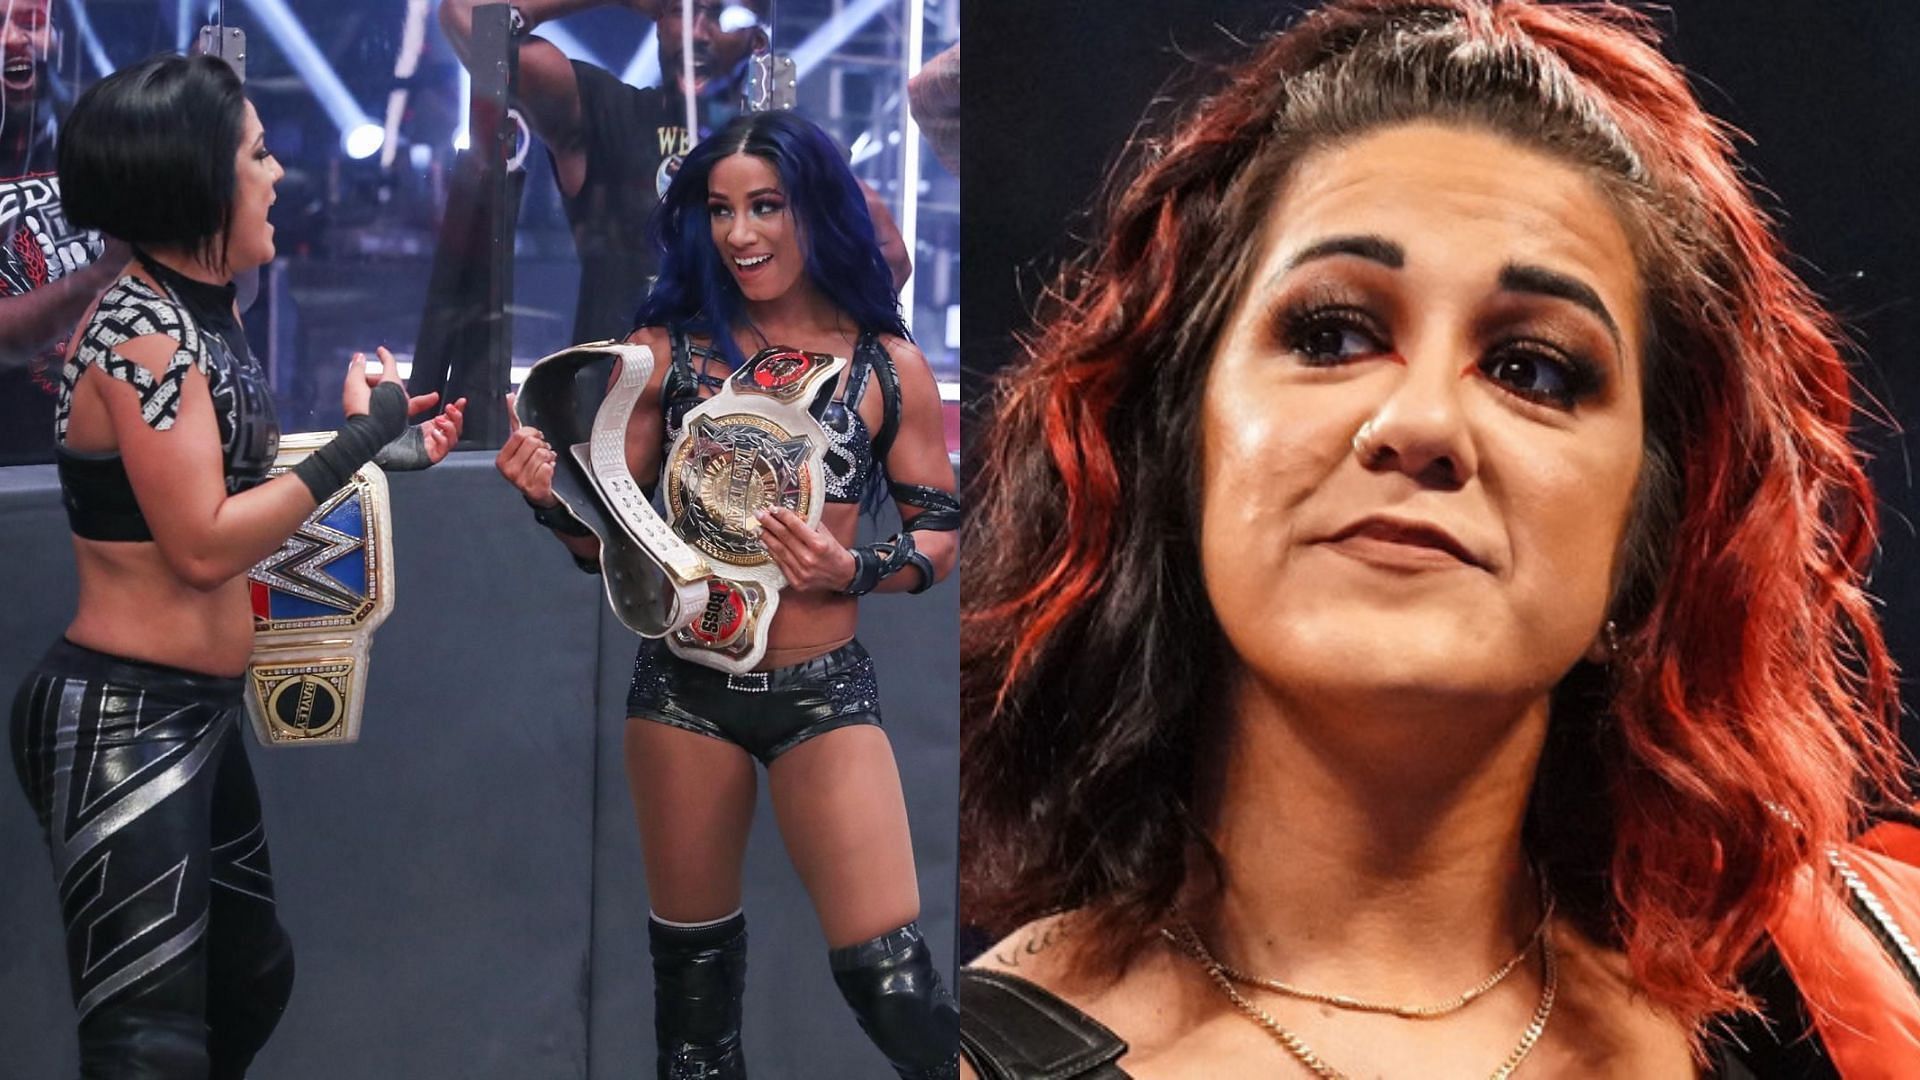 Bayley and Mercedes Mone (Sasha Banks) are former tag team partners